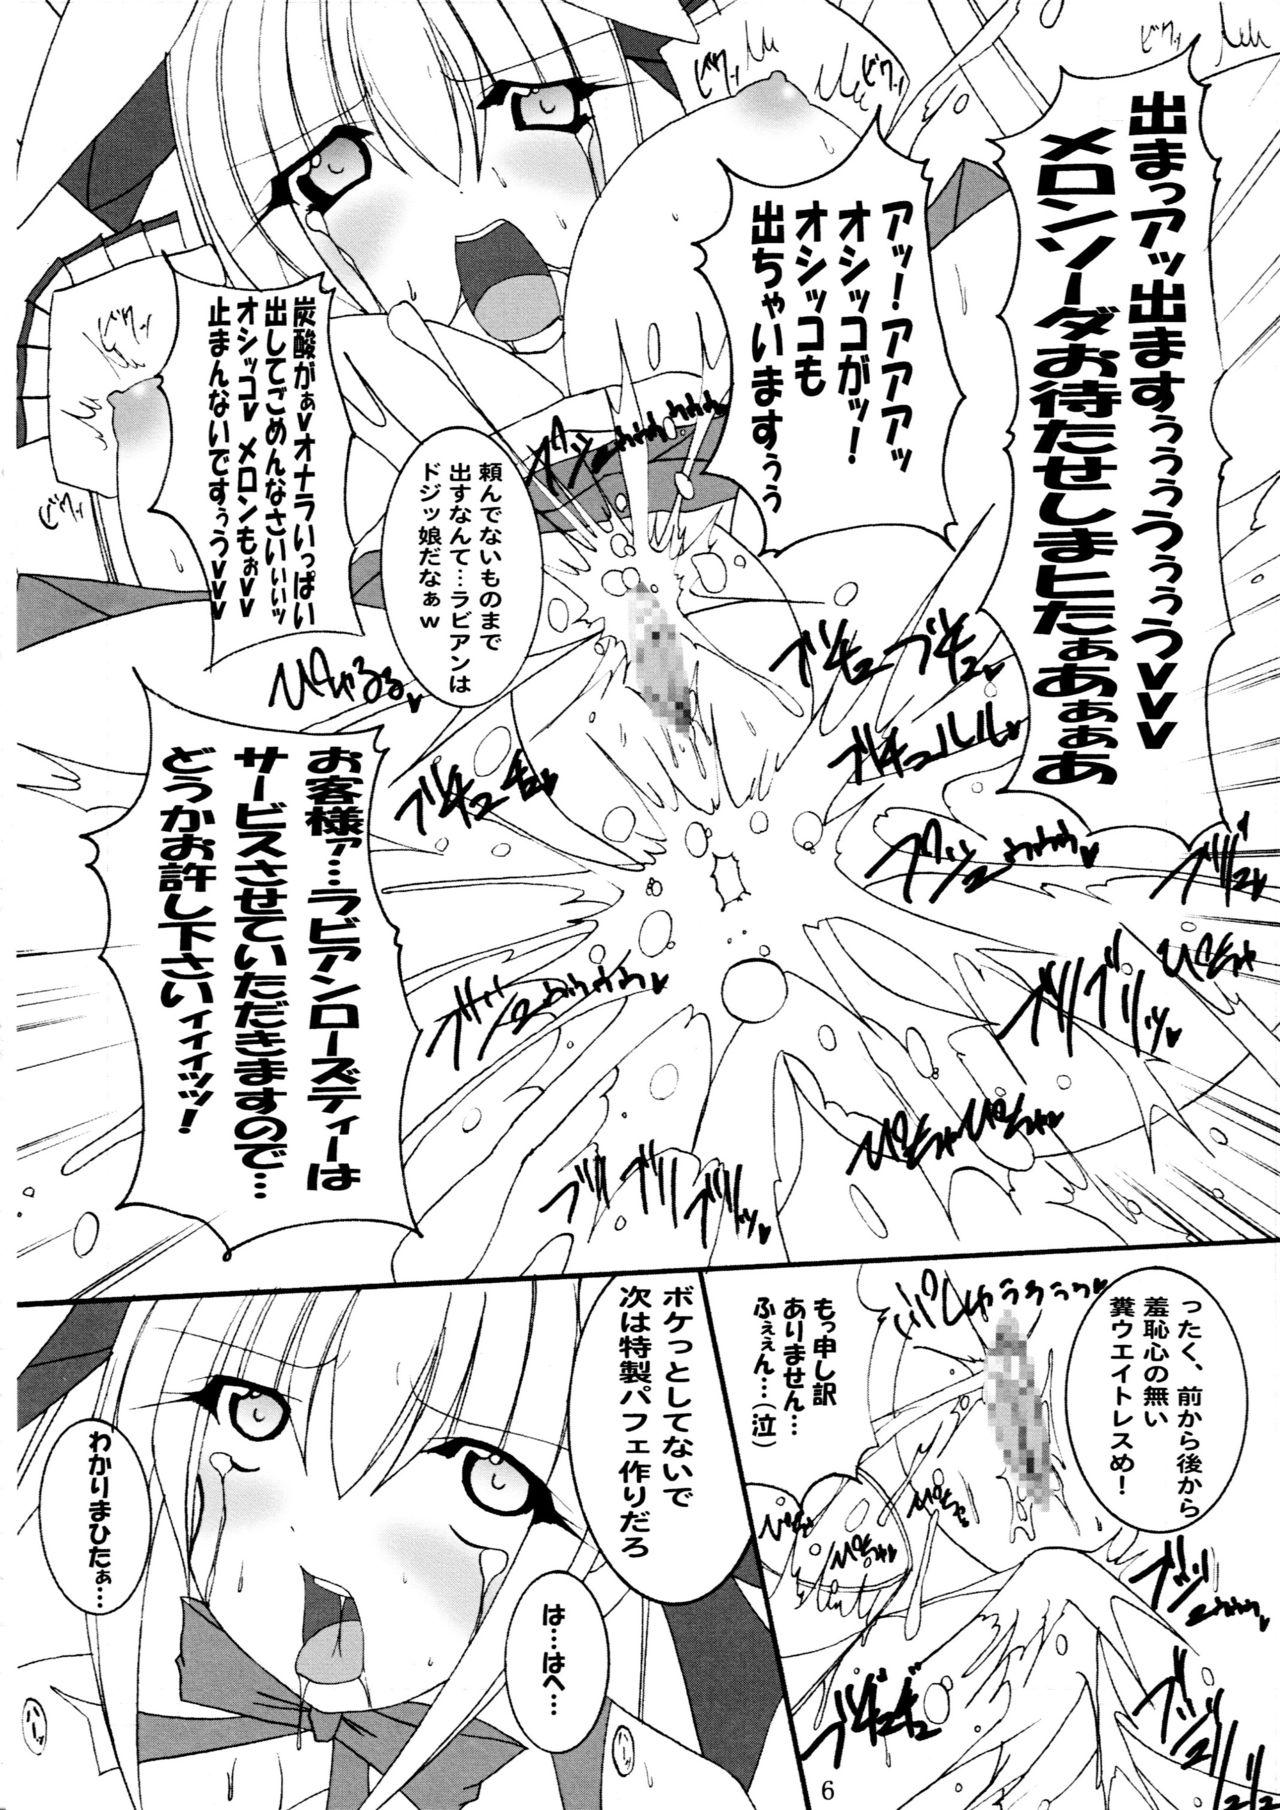 Perverted Hitori Twintail & Abnormal Carnival - Di gi charat Thief - Page 7